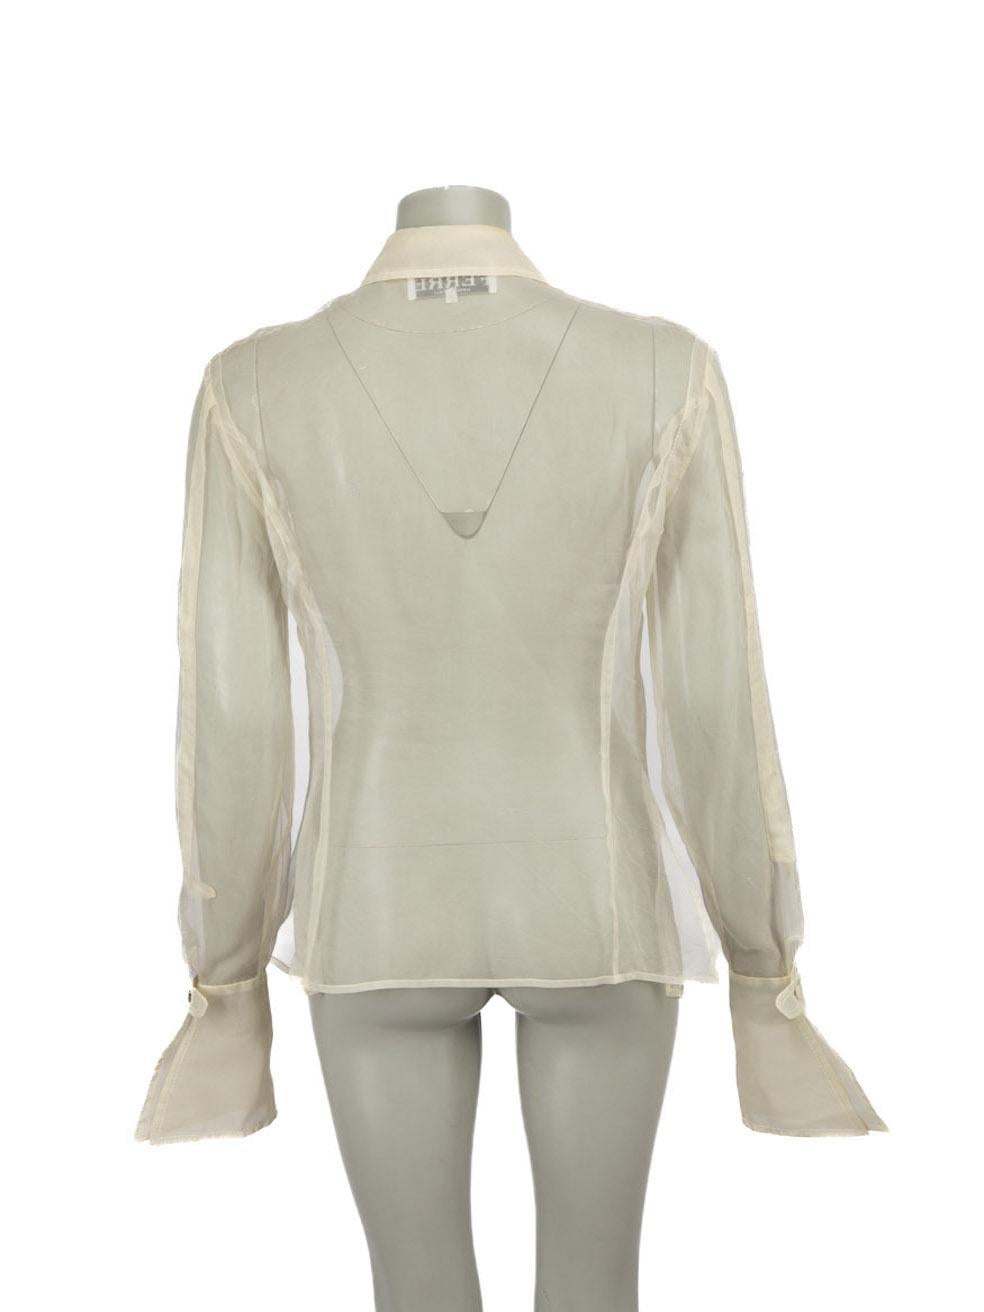 Gianfranco Ferré Ecru Sheer Tailored Blouse Size M In Excellent Condition In London, GB